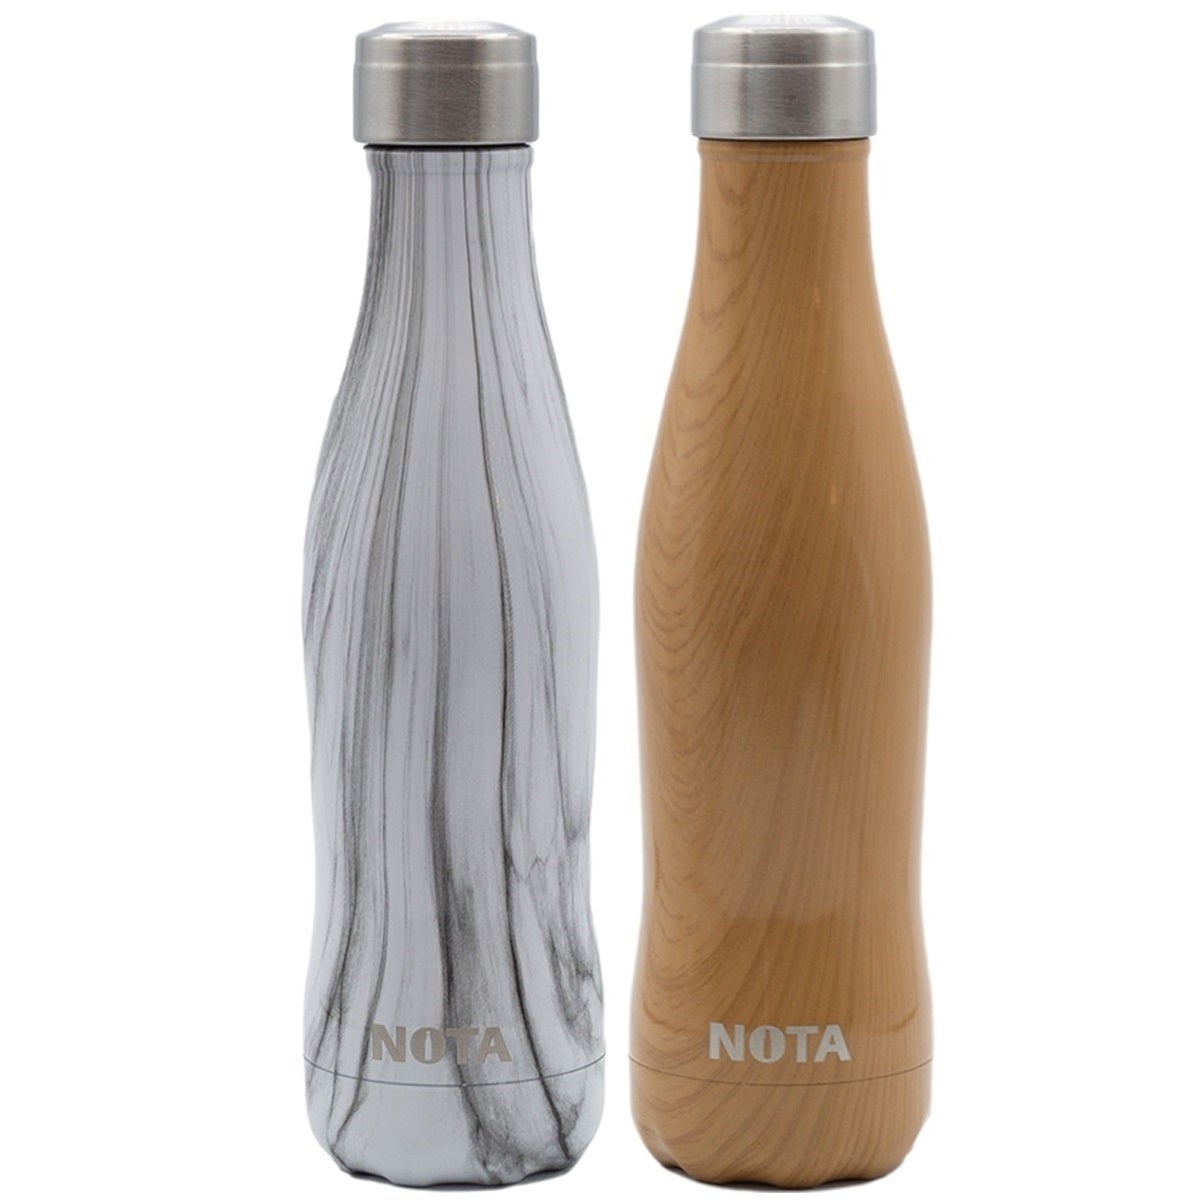 Nota Stainless Steel 17oz Water Bottle - Insulated, Leakproof